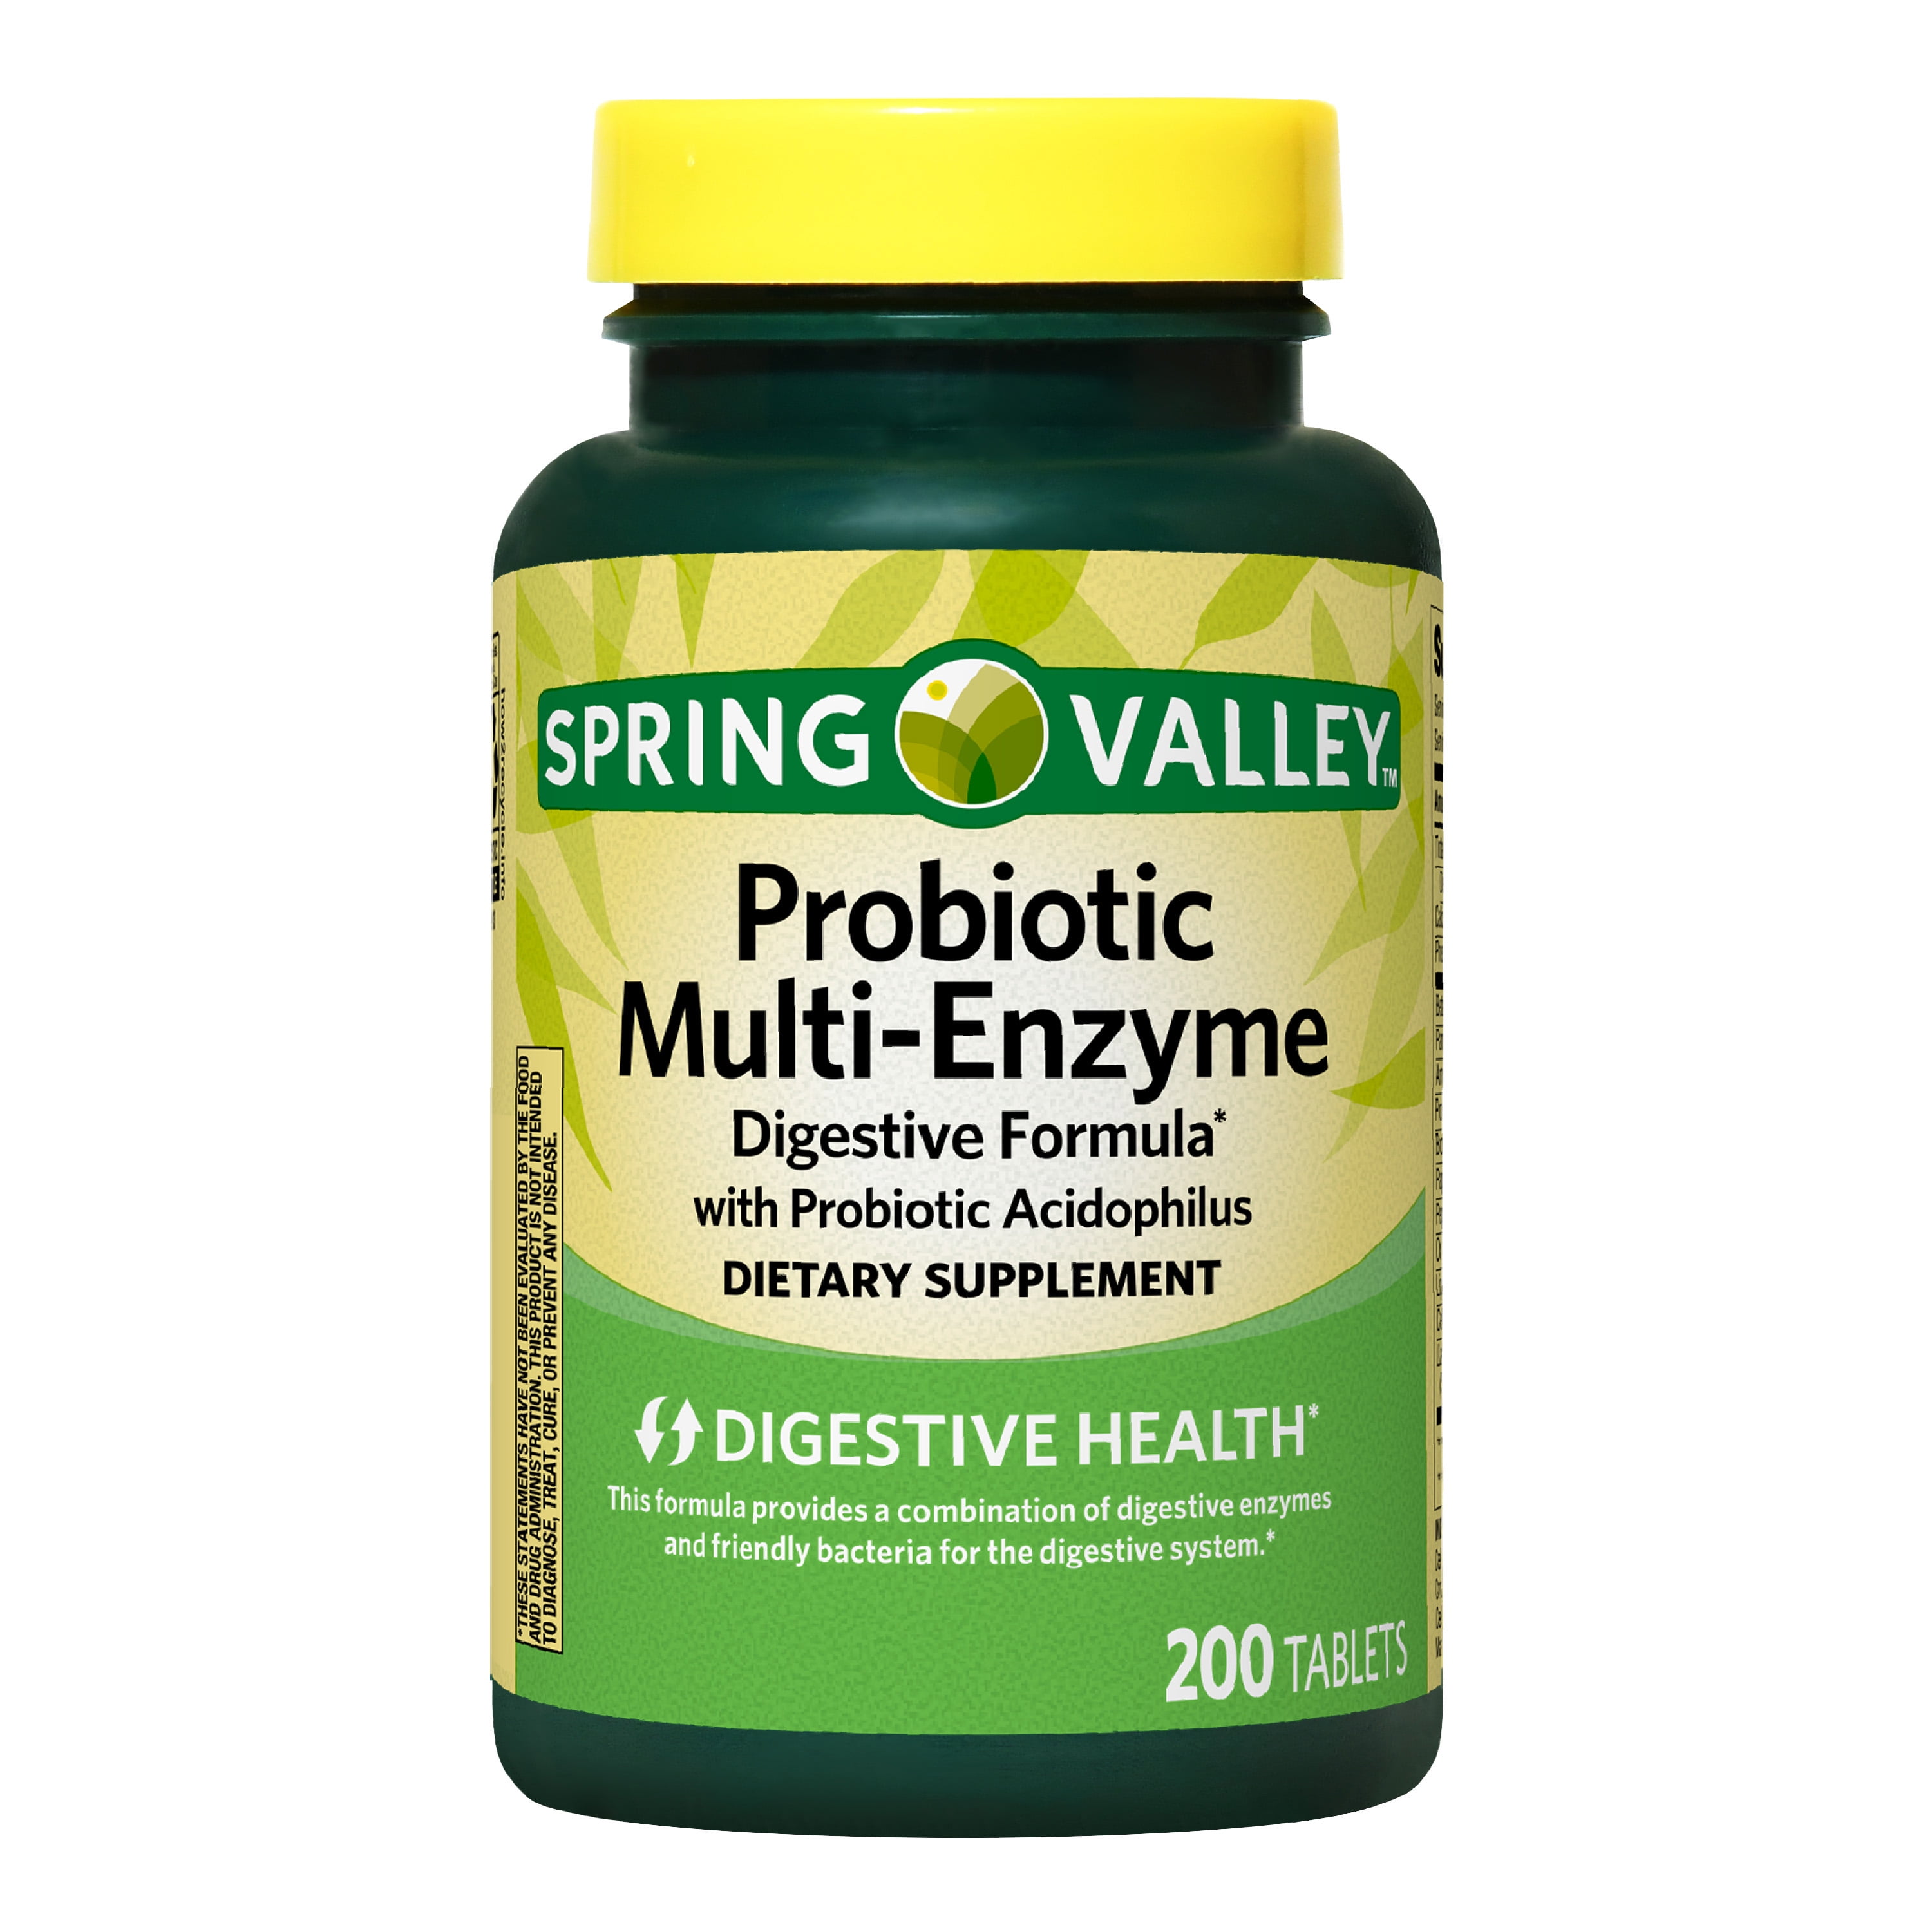 Spring Valley Probiotic Multi-Enzyme Digestive Formula Tablets Dietary Supplement, 200 Count